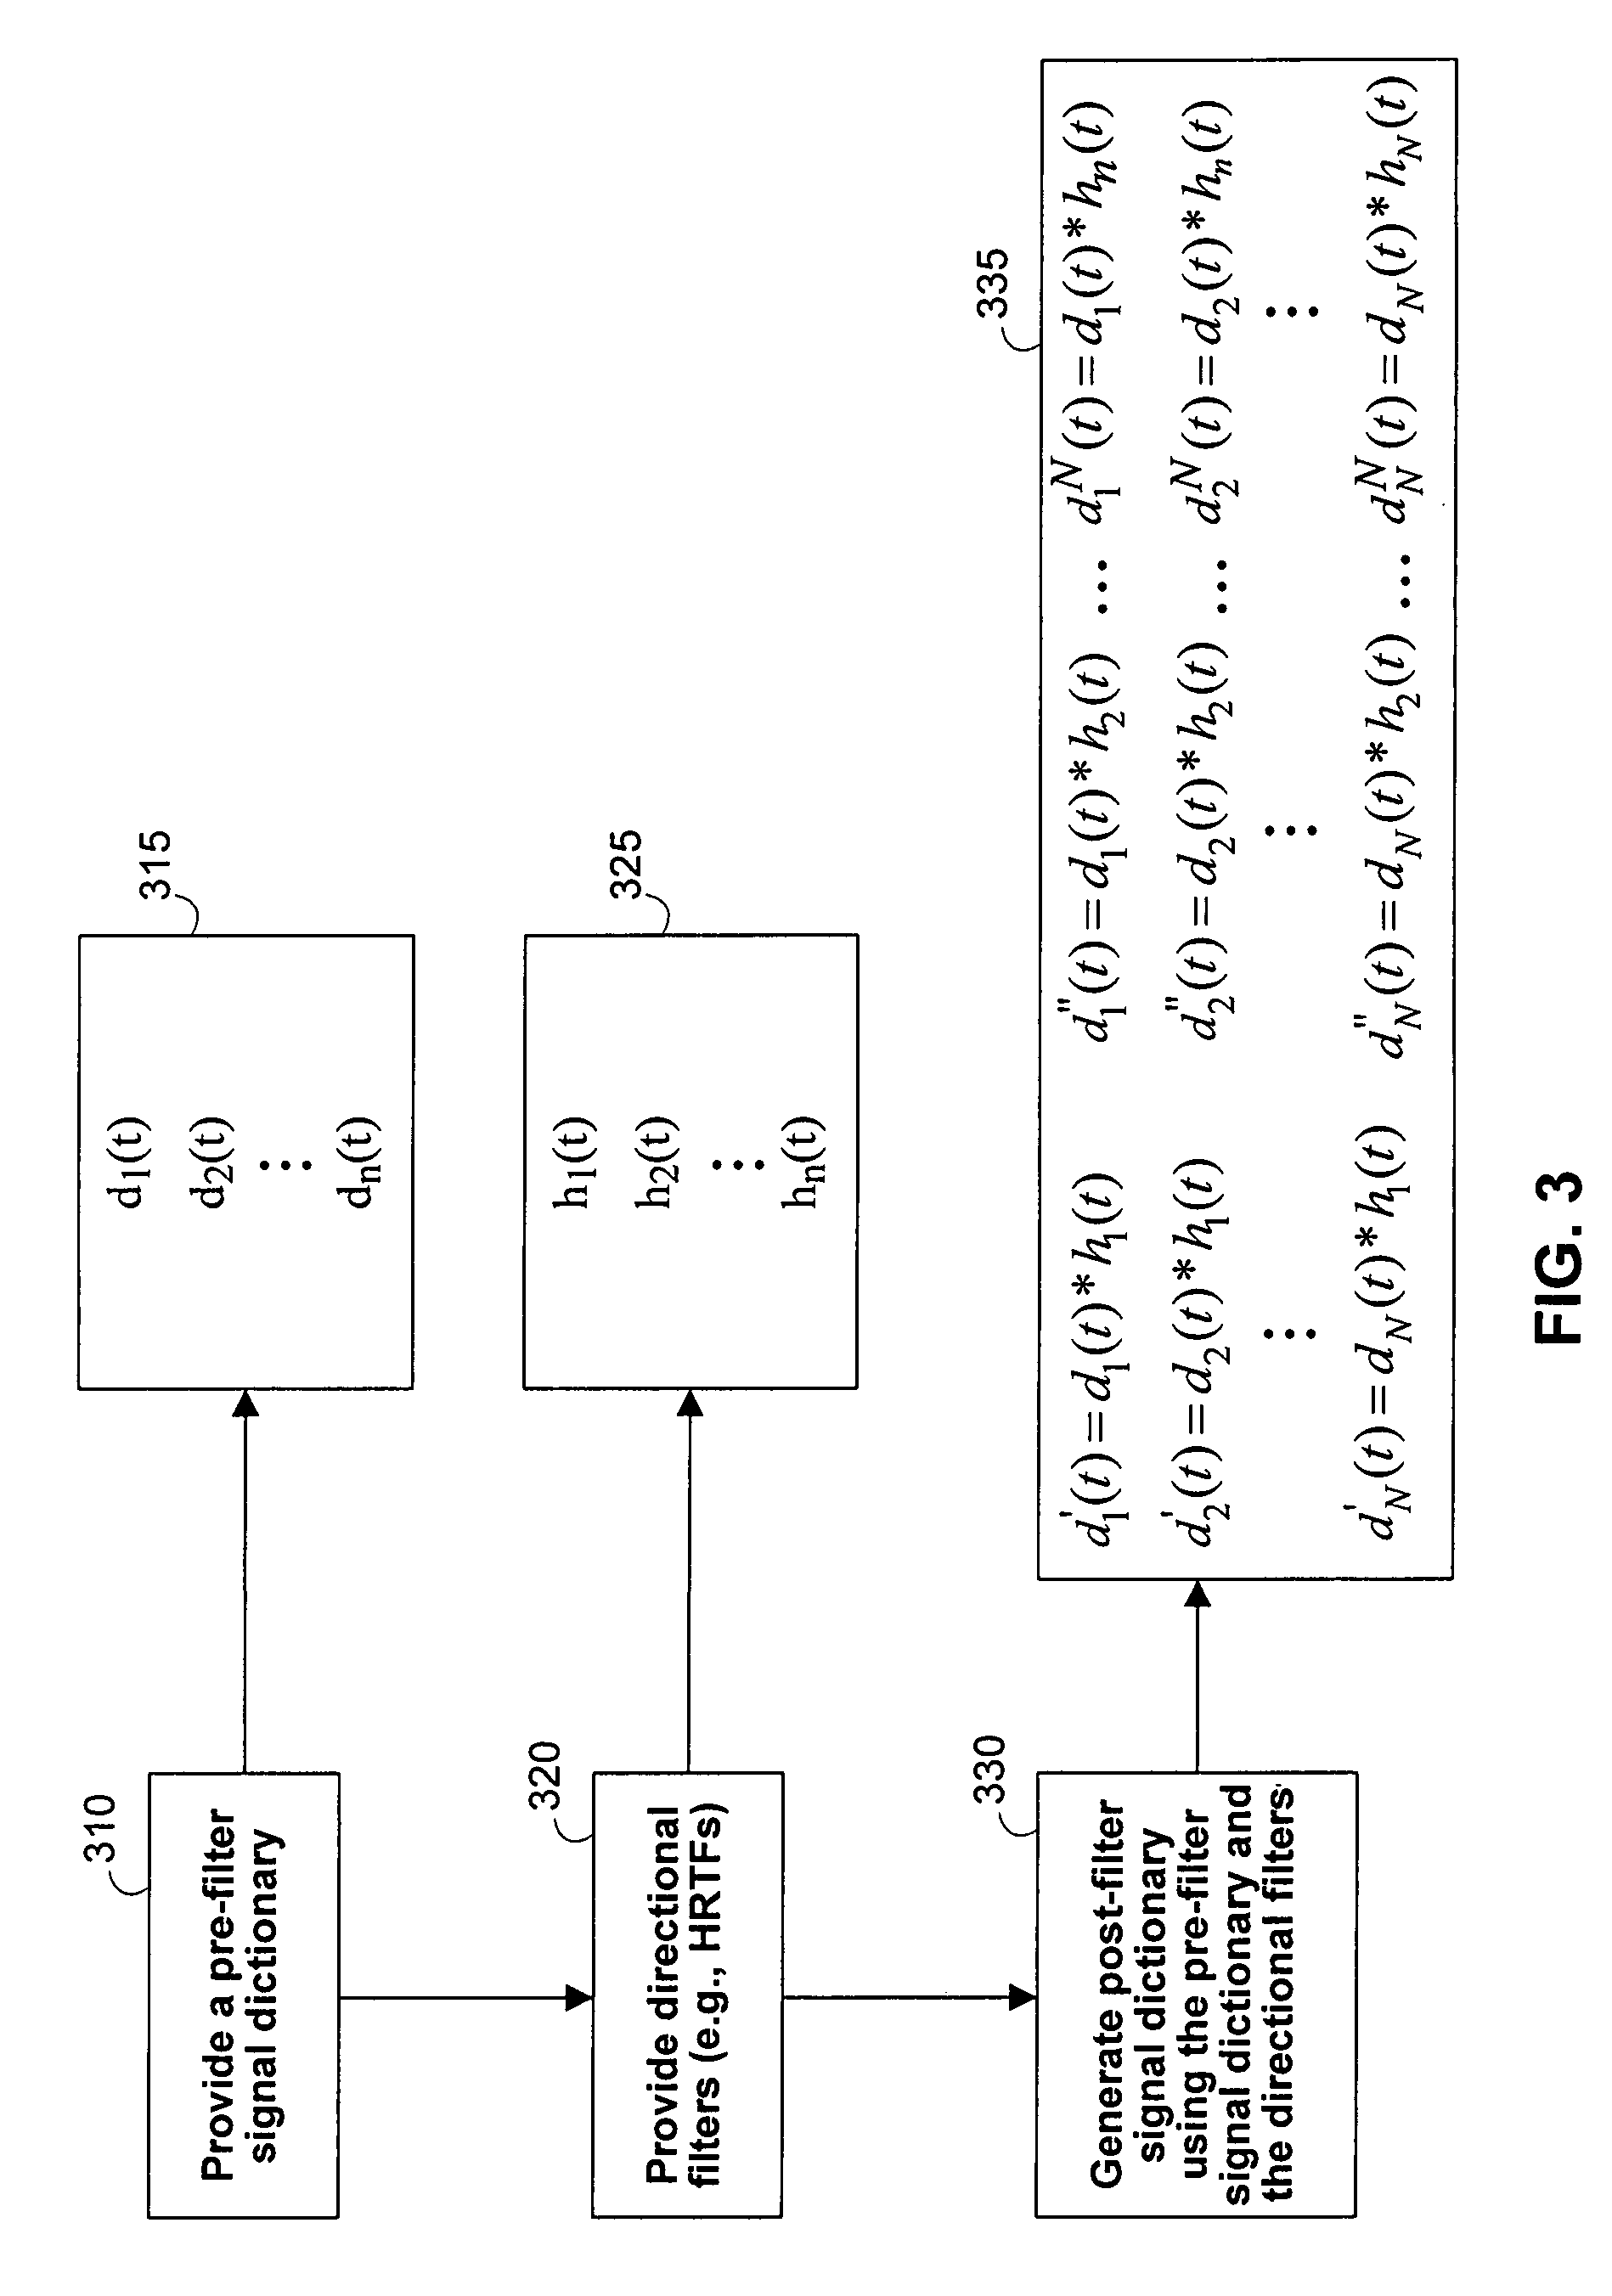 Systems and methods for separating multiple sources using directional filtering